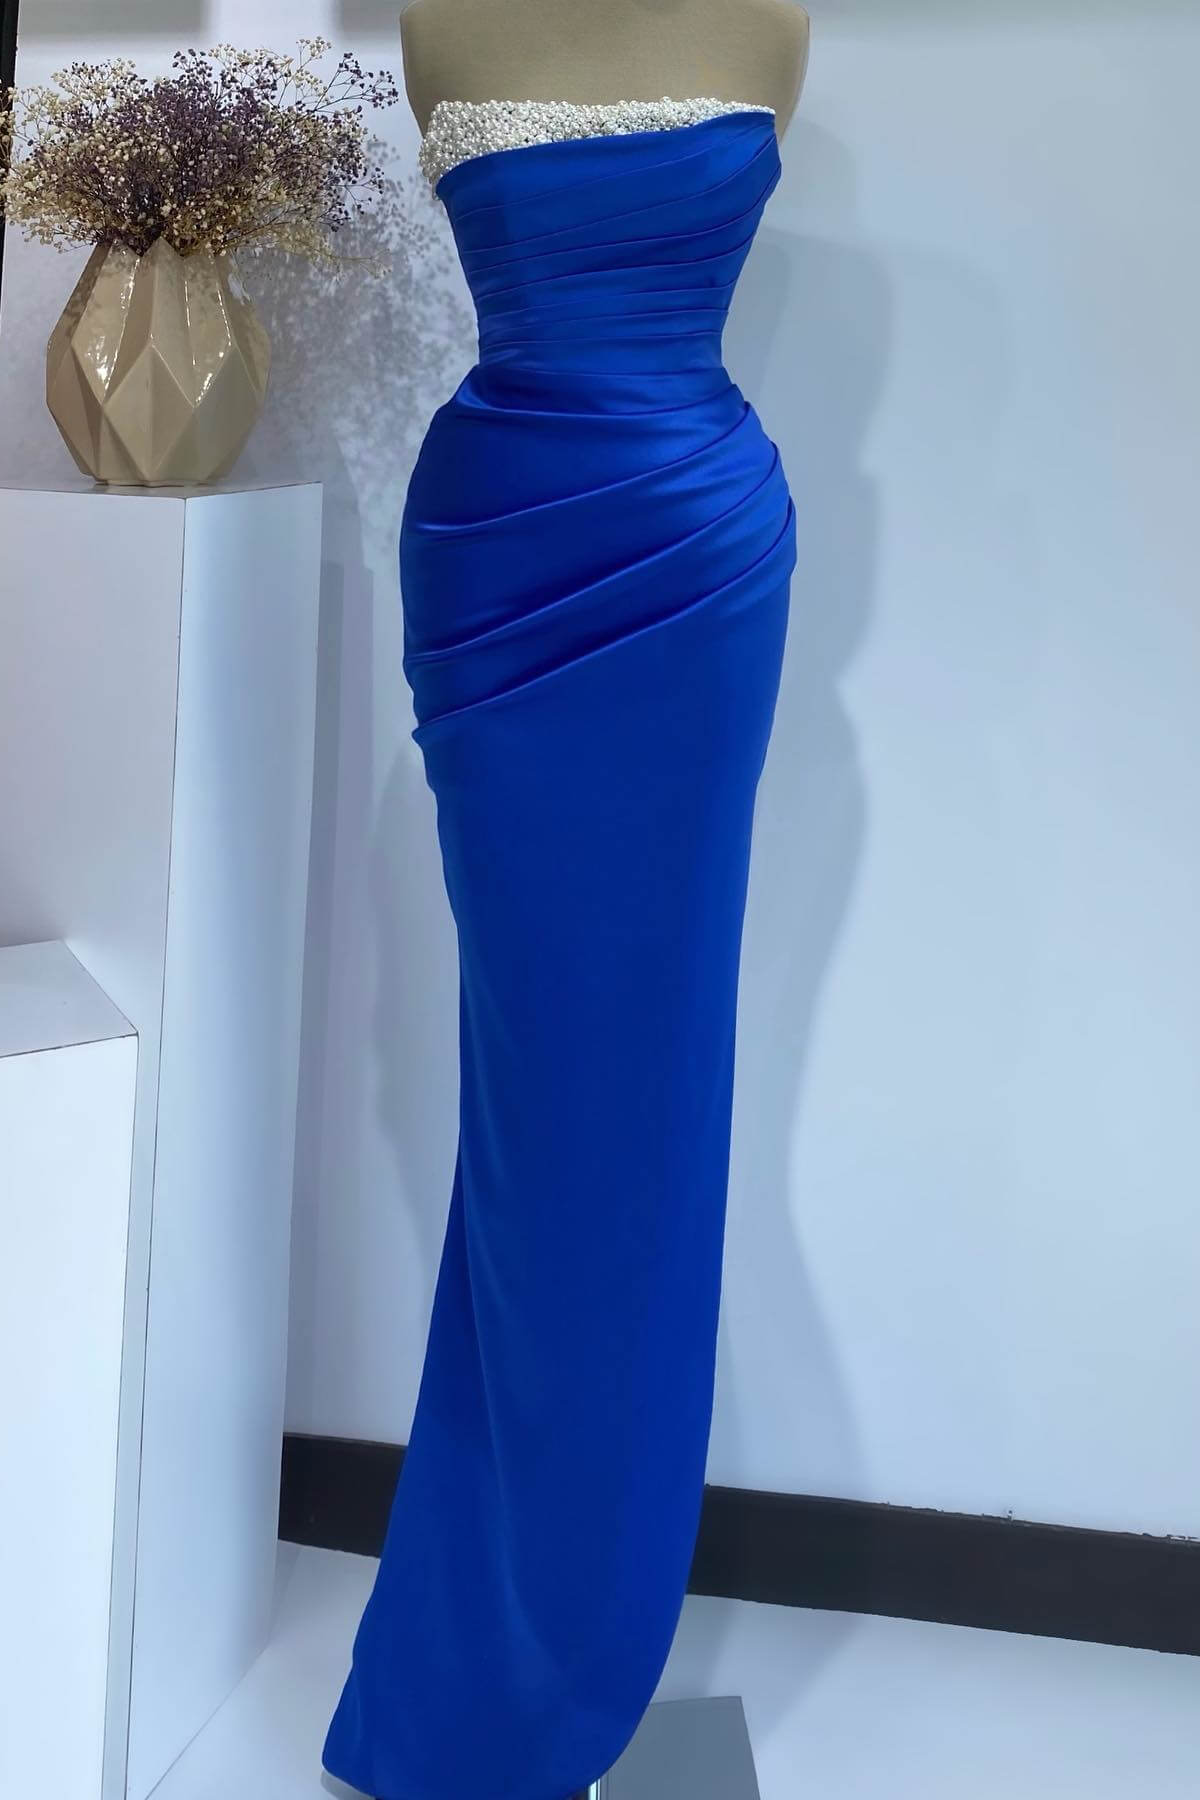 Chic Royal Blue Strapless Sleeveless Mermaid Evening Gown With Crystals Pleats - lulusllly